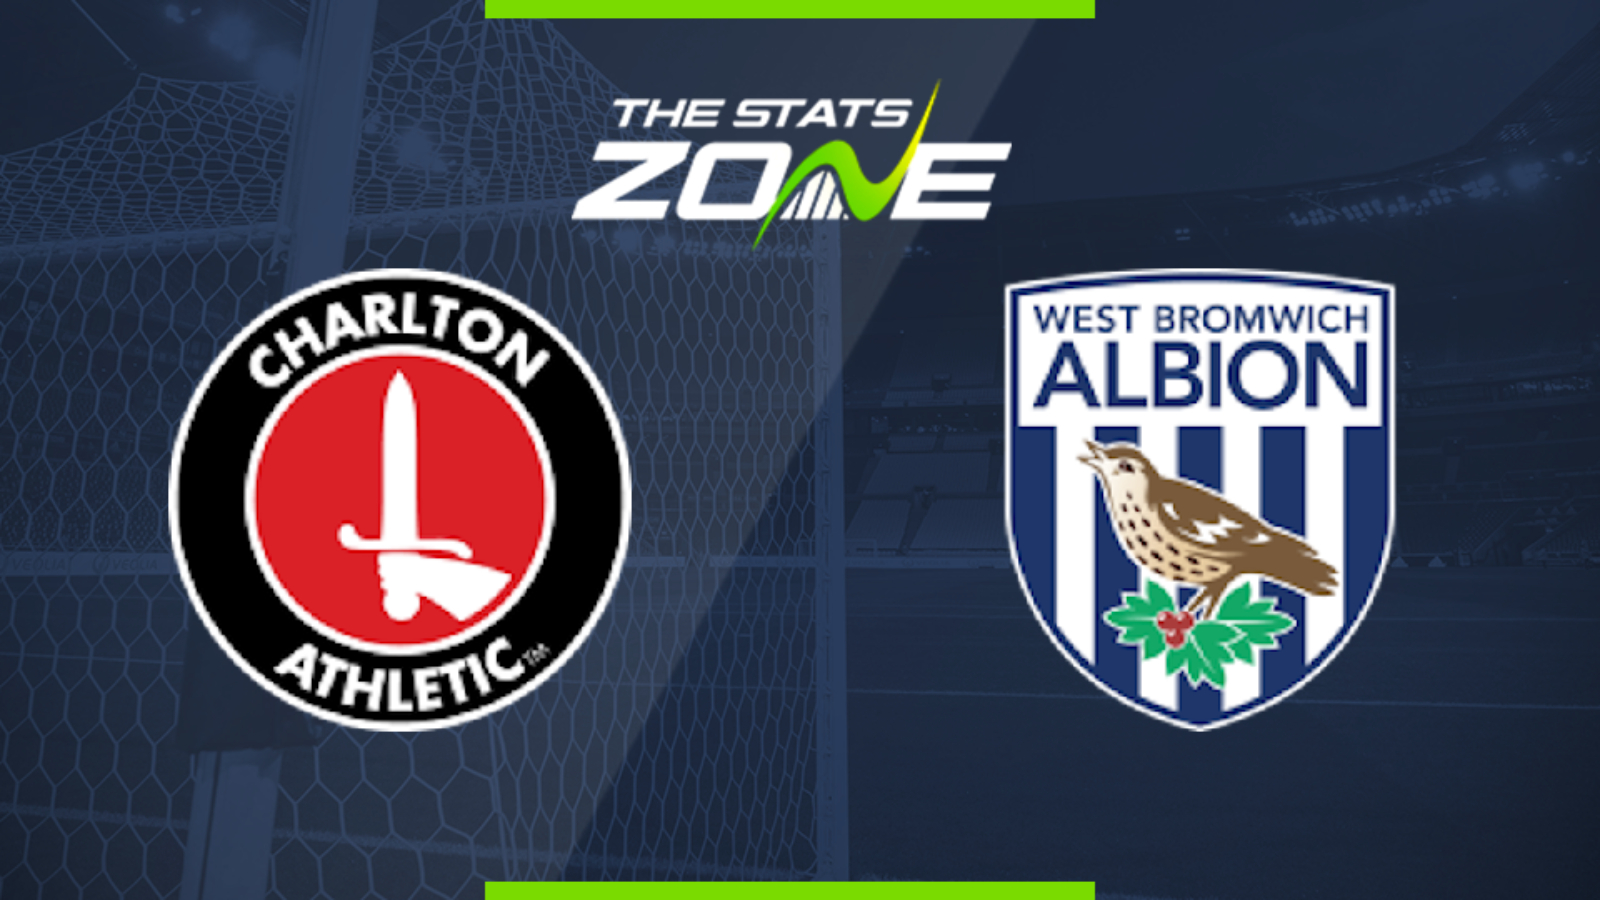 2019-20 Championship – Charlton vs West Brom Preview & Prediction - The Stats Zone1600 x 900